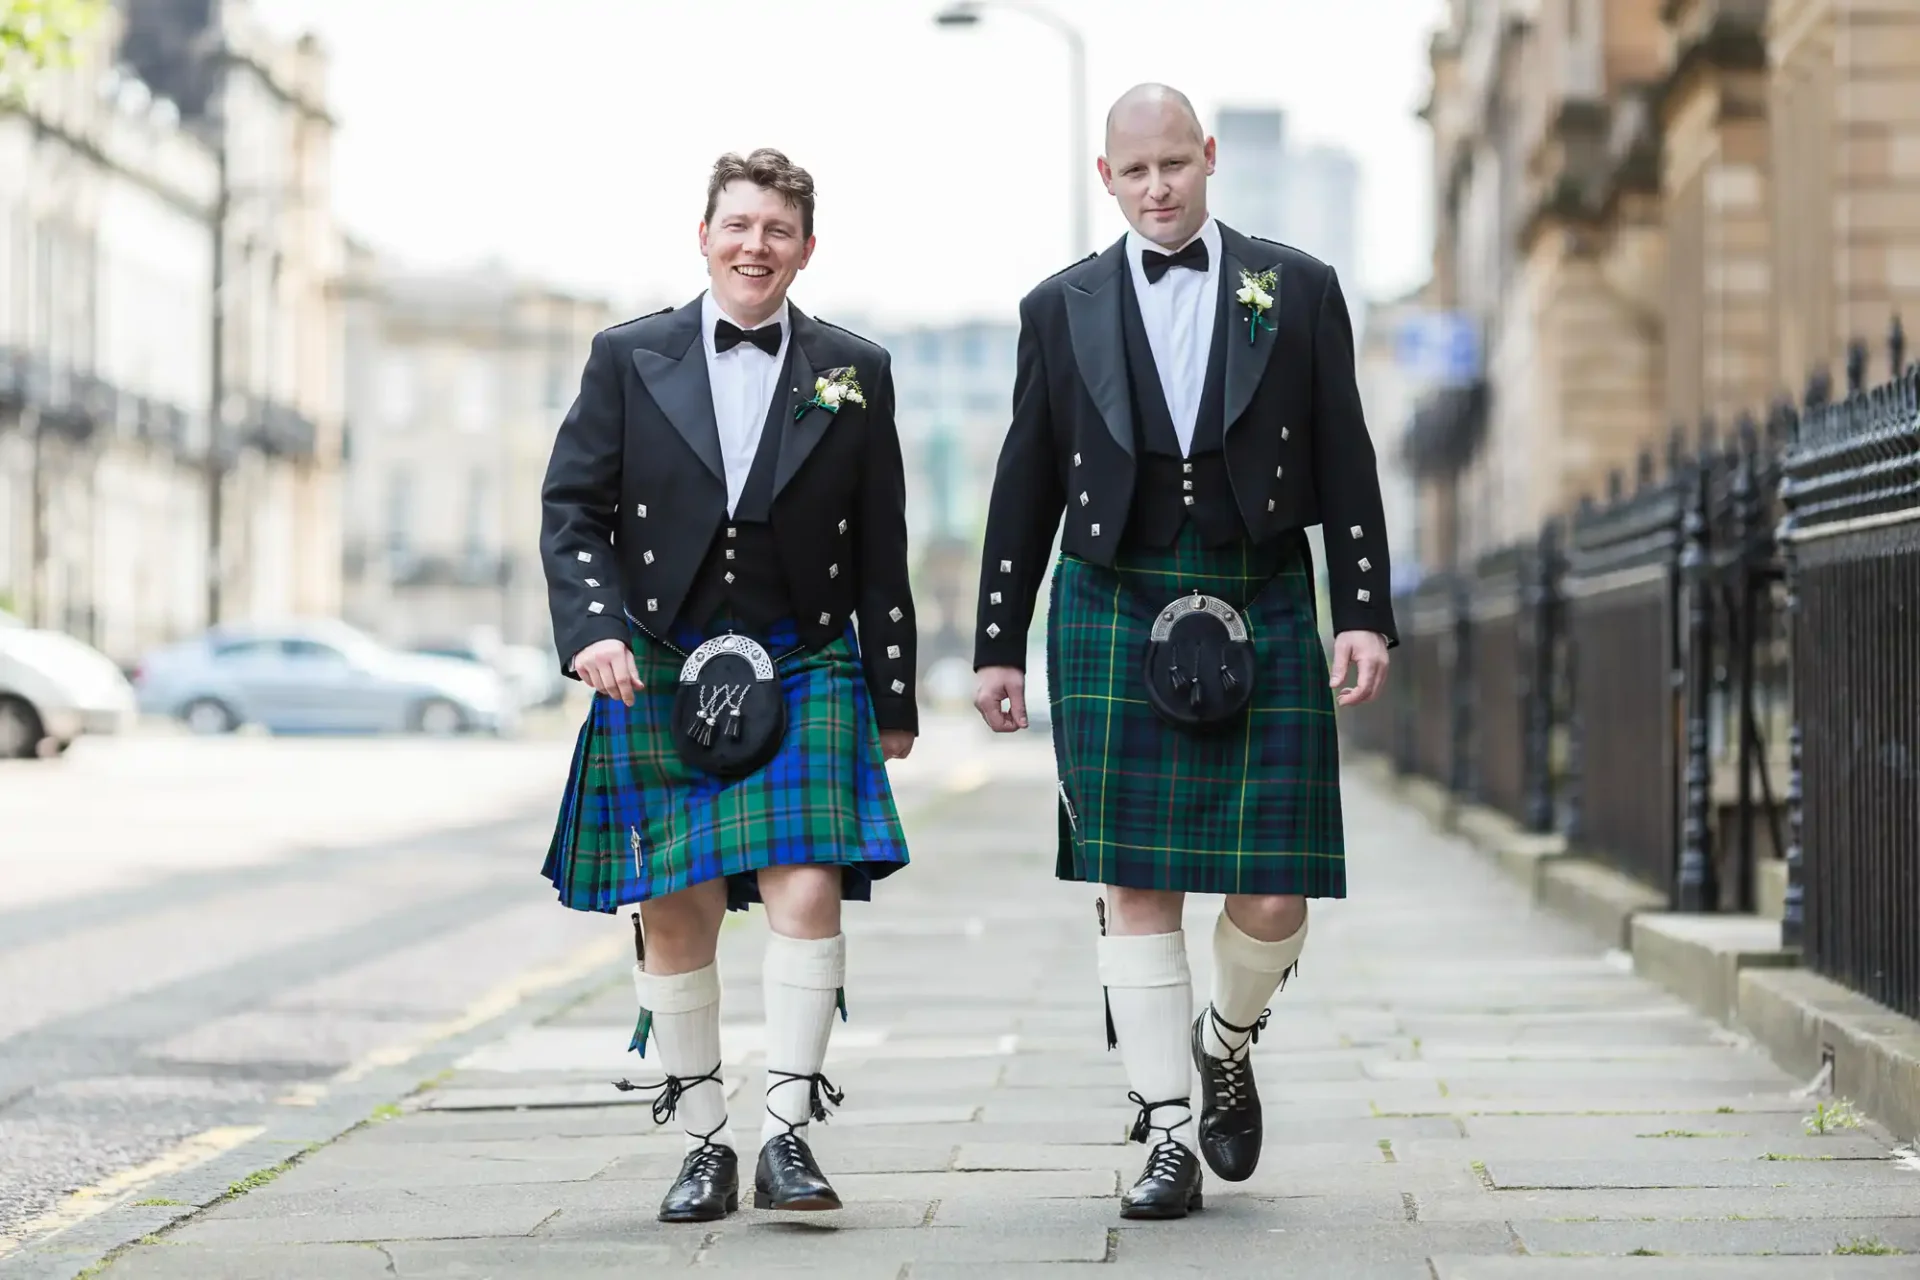 Two men dressed in traditional scottish kilts and jackets, smiling as they walk down a city street.